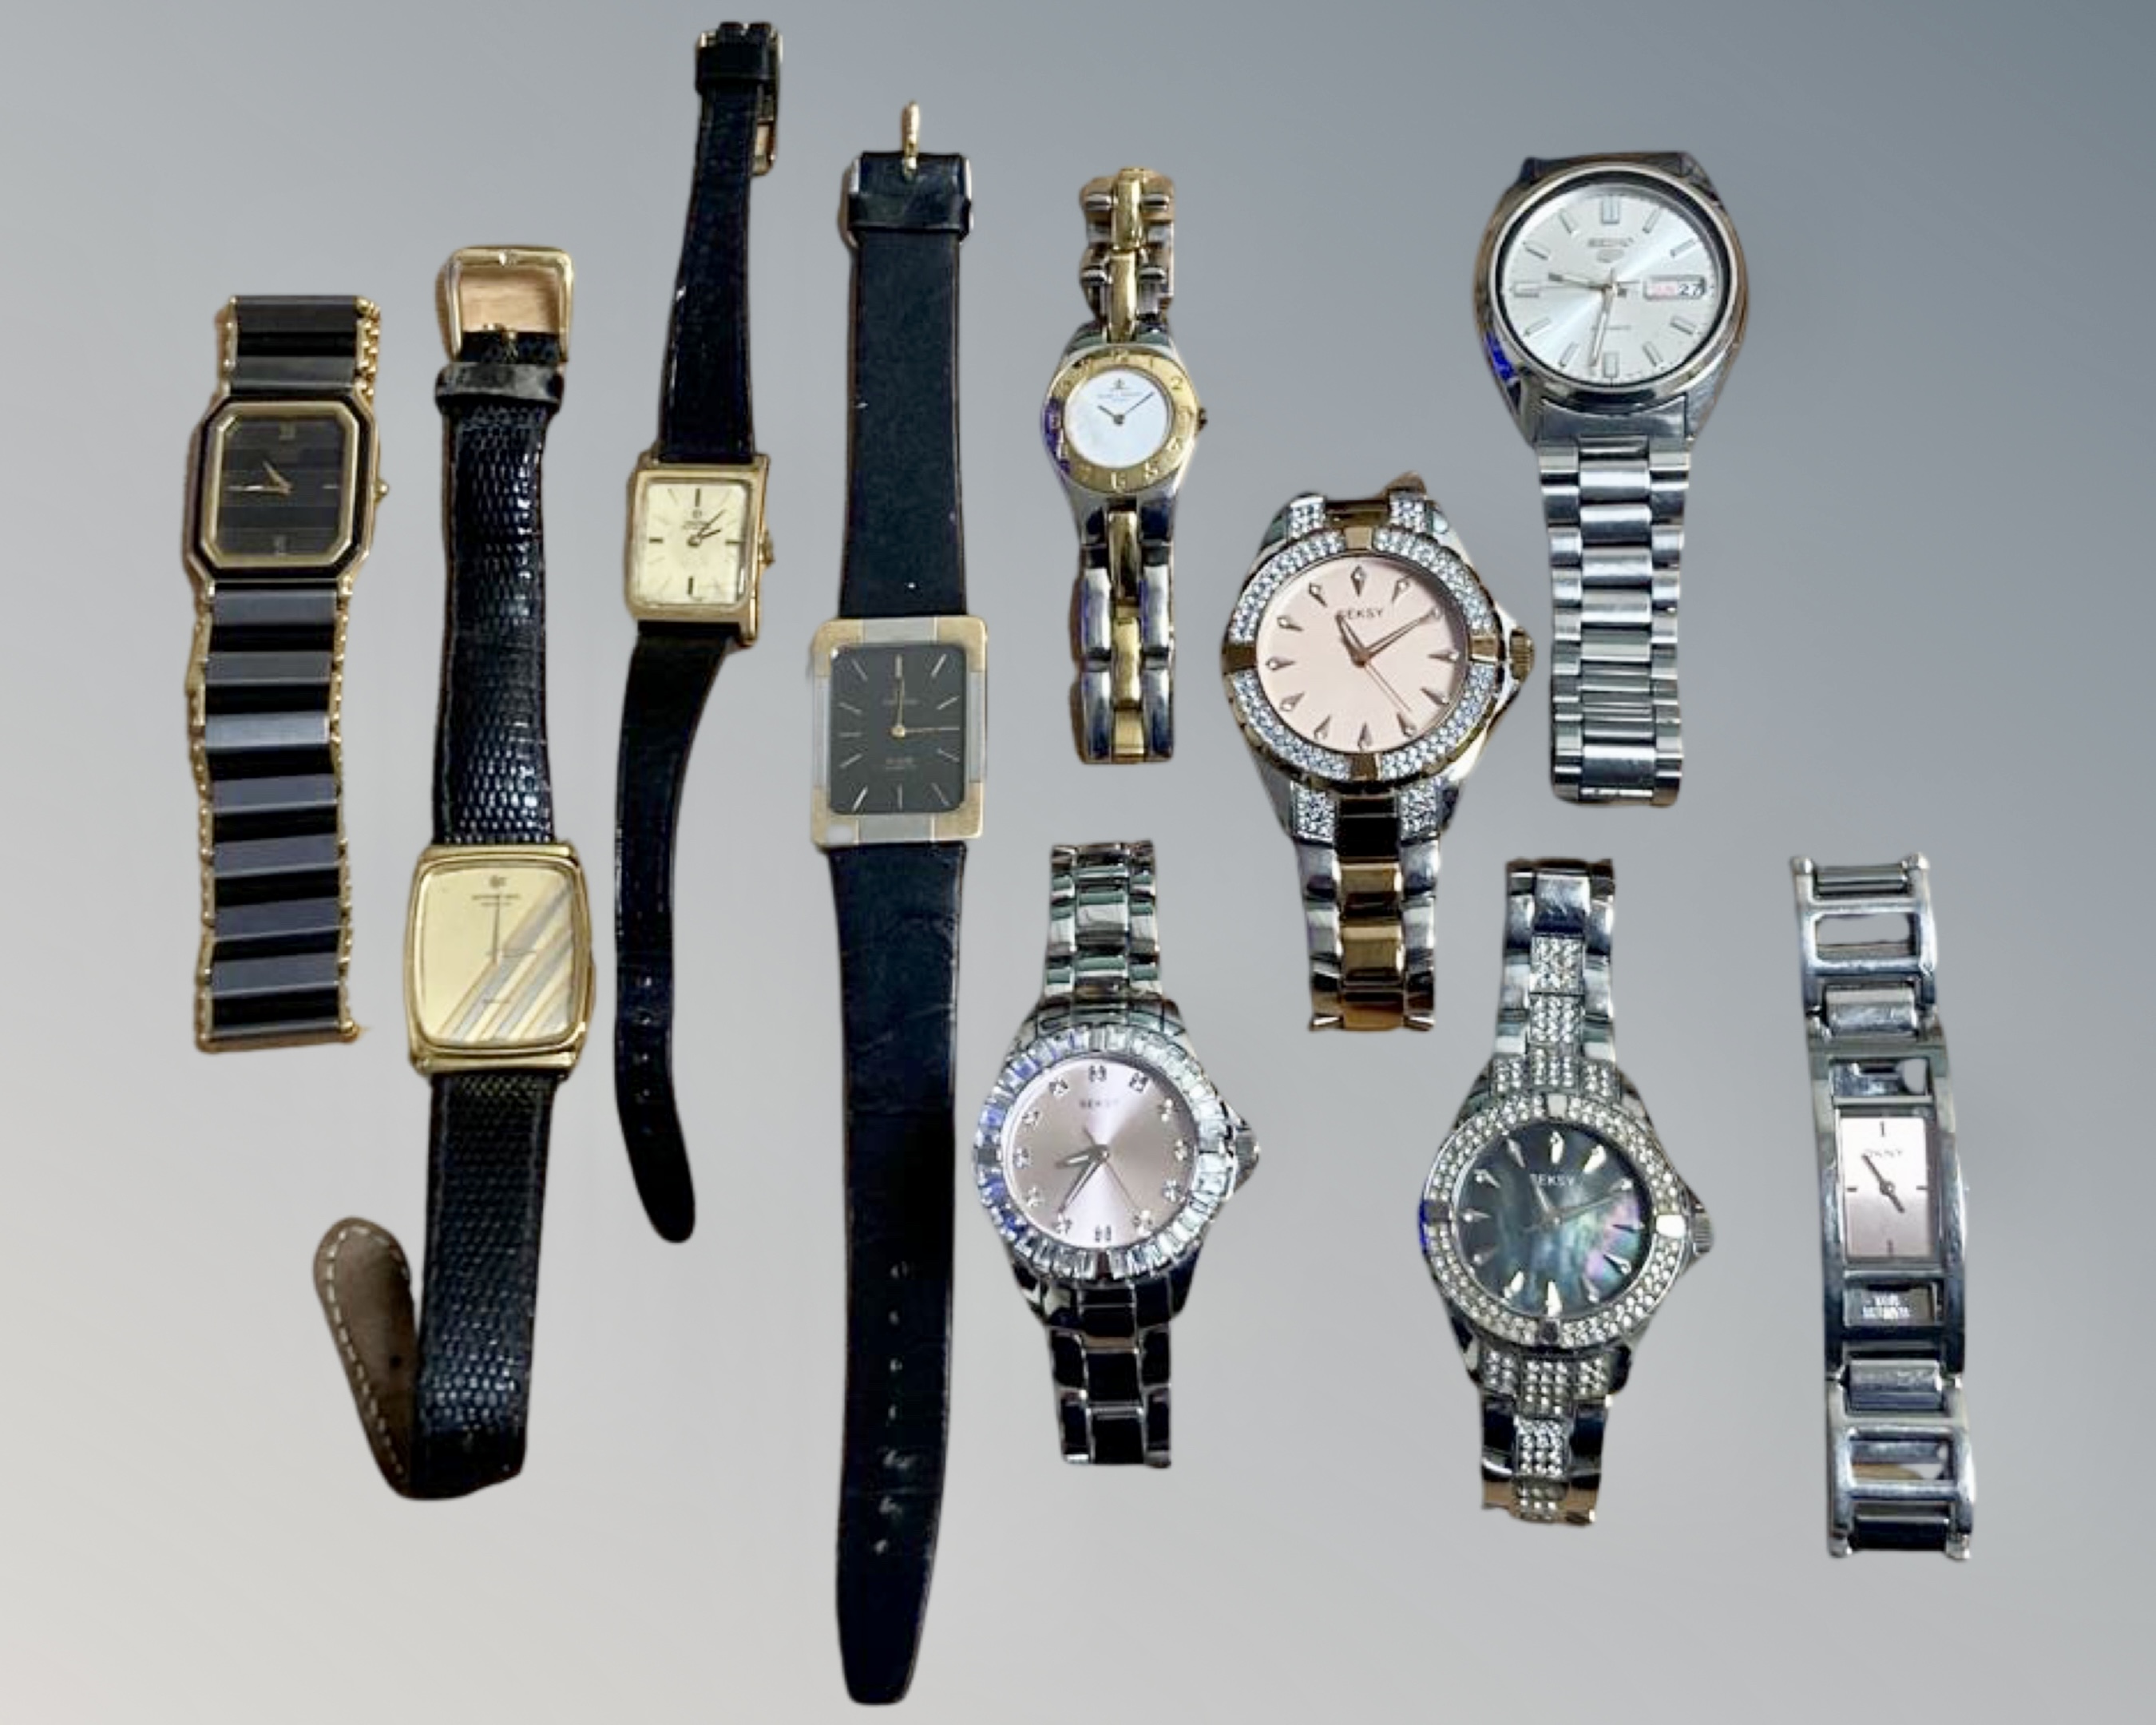 A collection of watches, DKNY, Seiko etc.